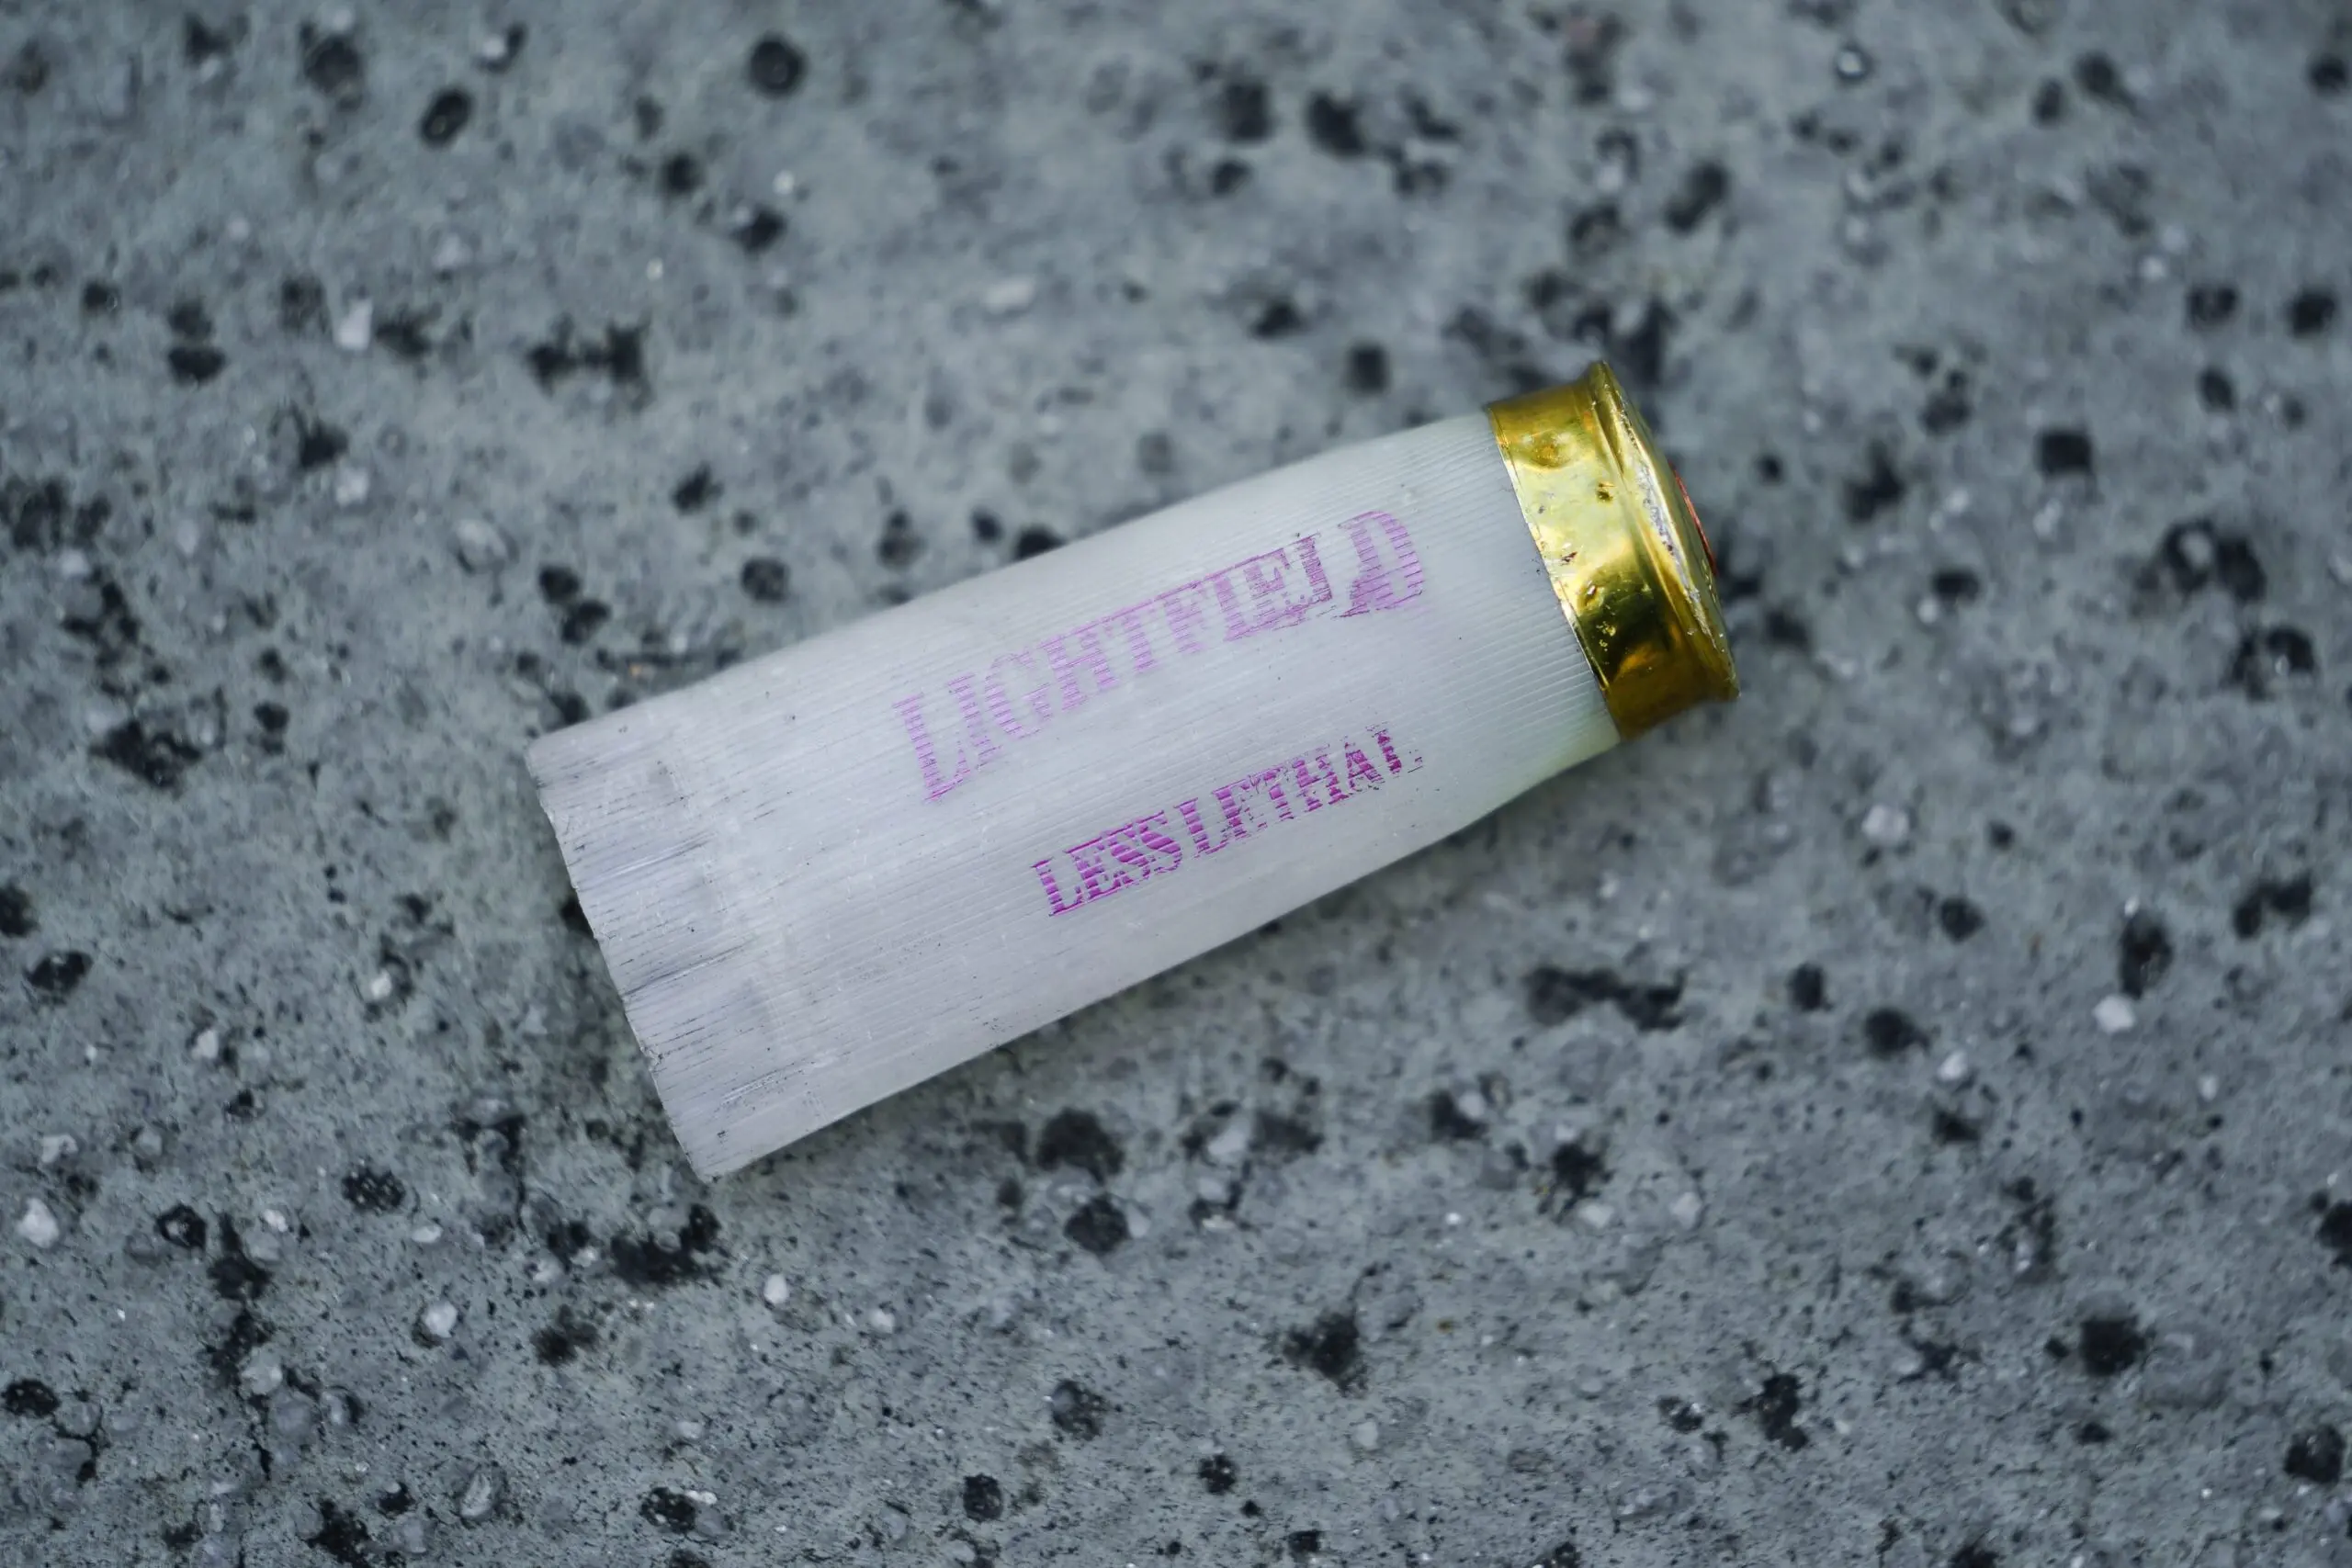 A shotgun shell with the words "less lethal" on it is crushed on the ground.